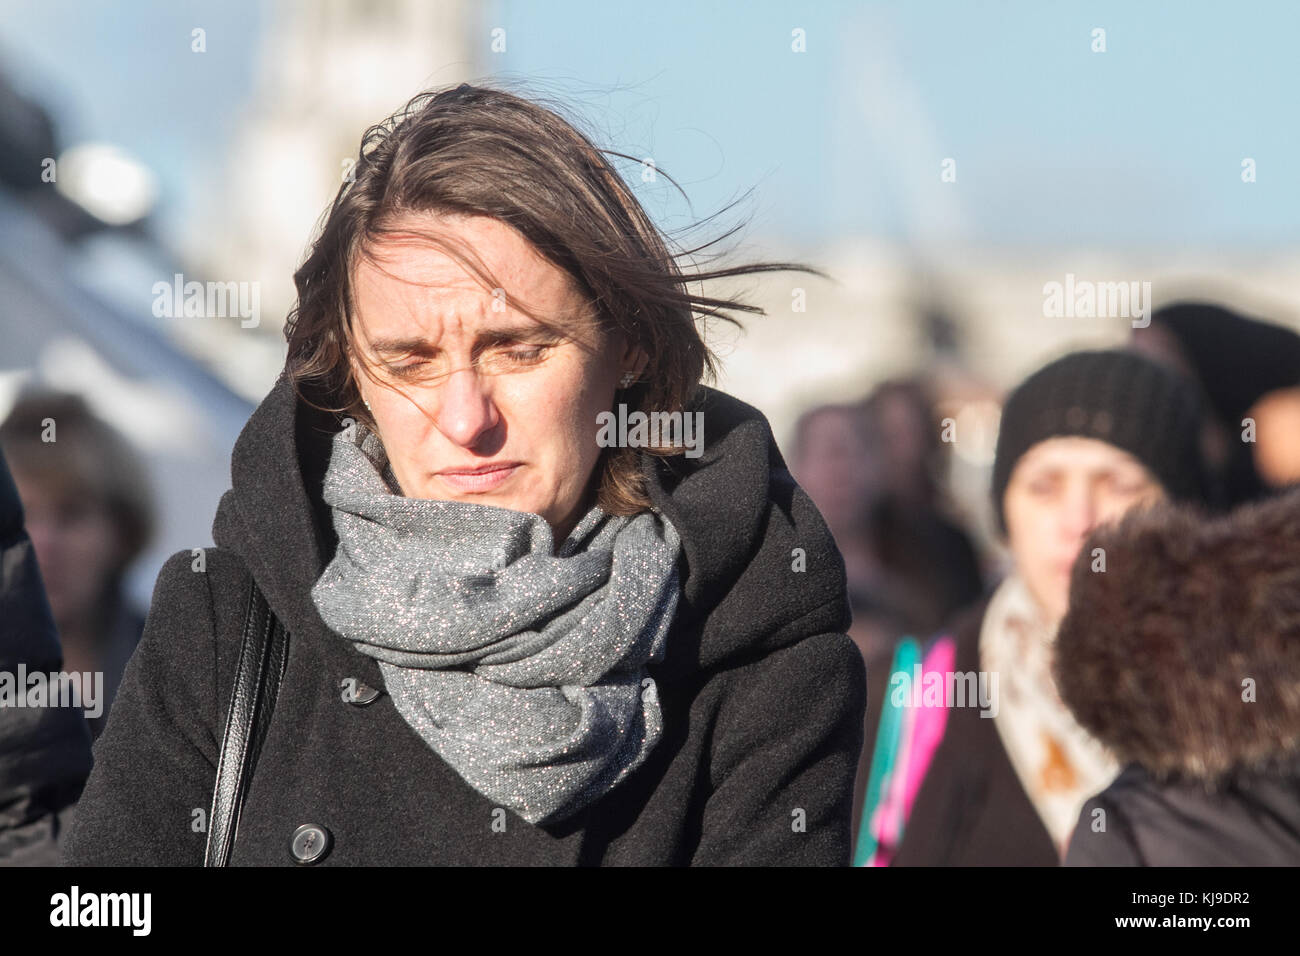 London, UK. 23rd Nov, 2017. People struggle with the blustery cold weather conditions walking on Millenium Bridge London with winds likely to gust up to 60mph in some places  Credit: amer ghazzal/Alamy Live News Stock Photo